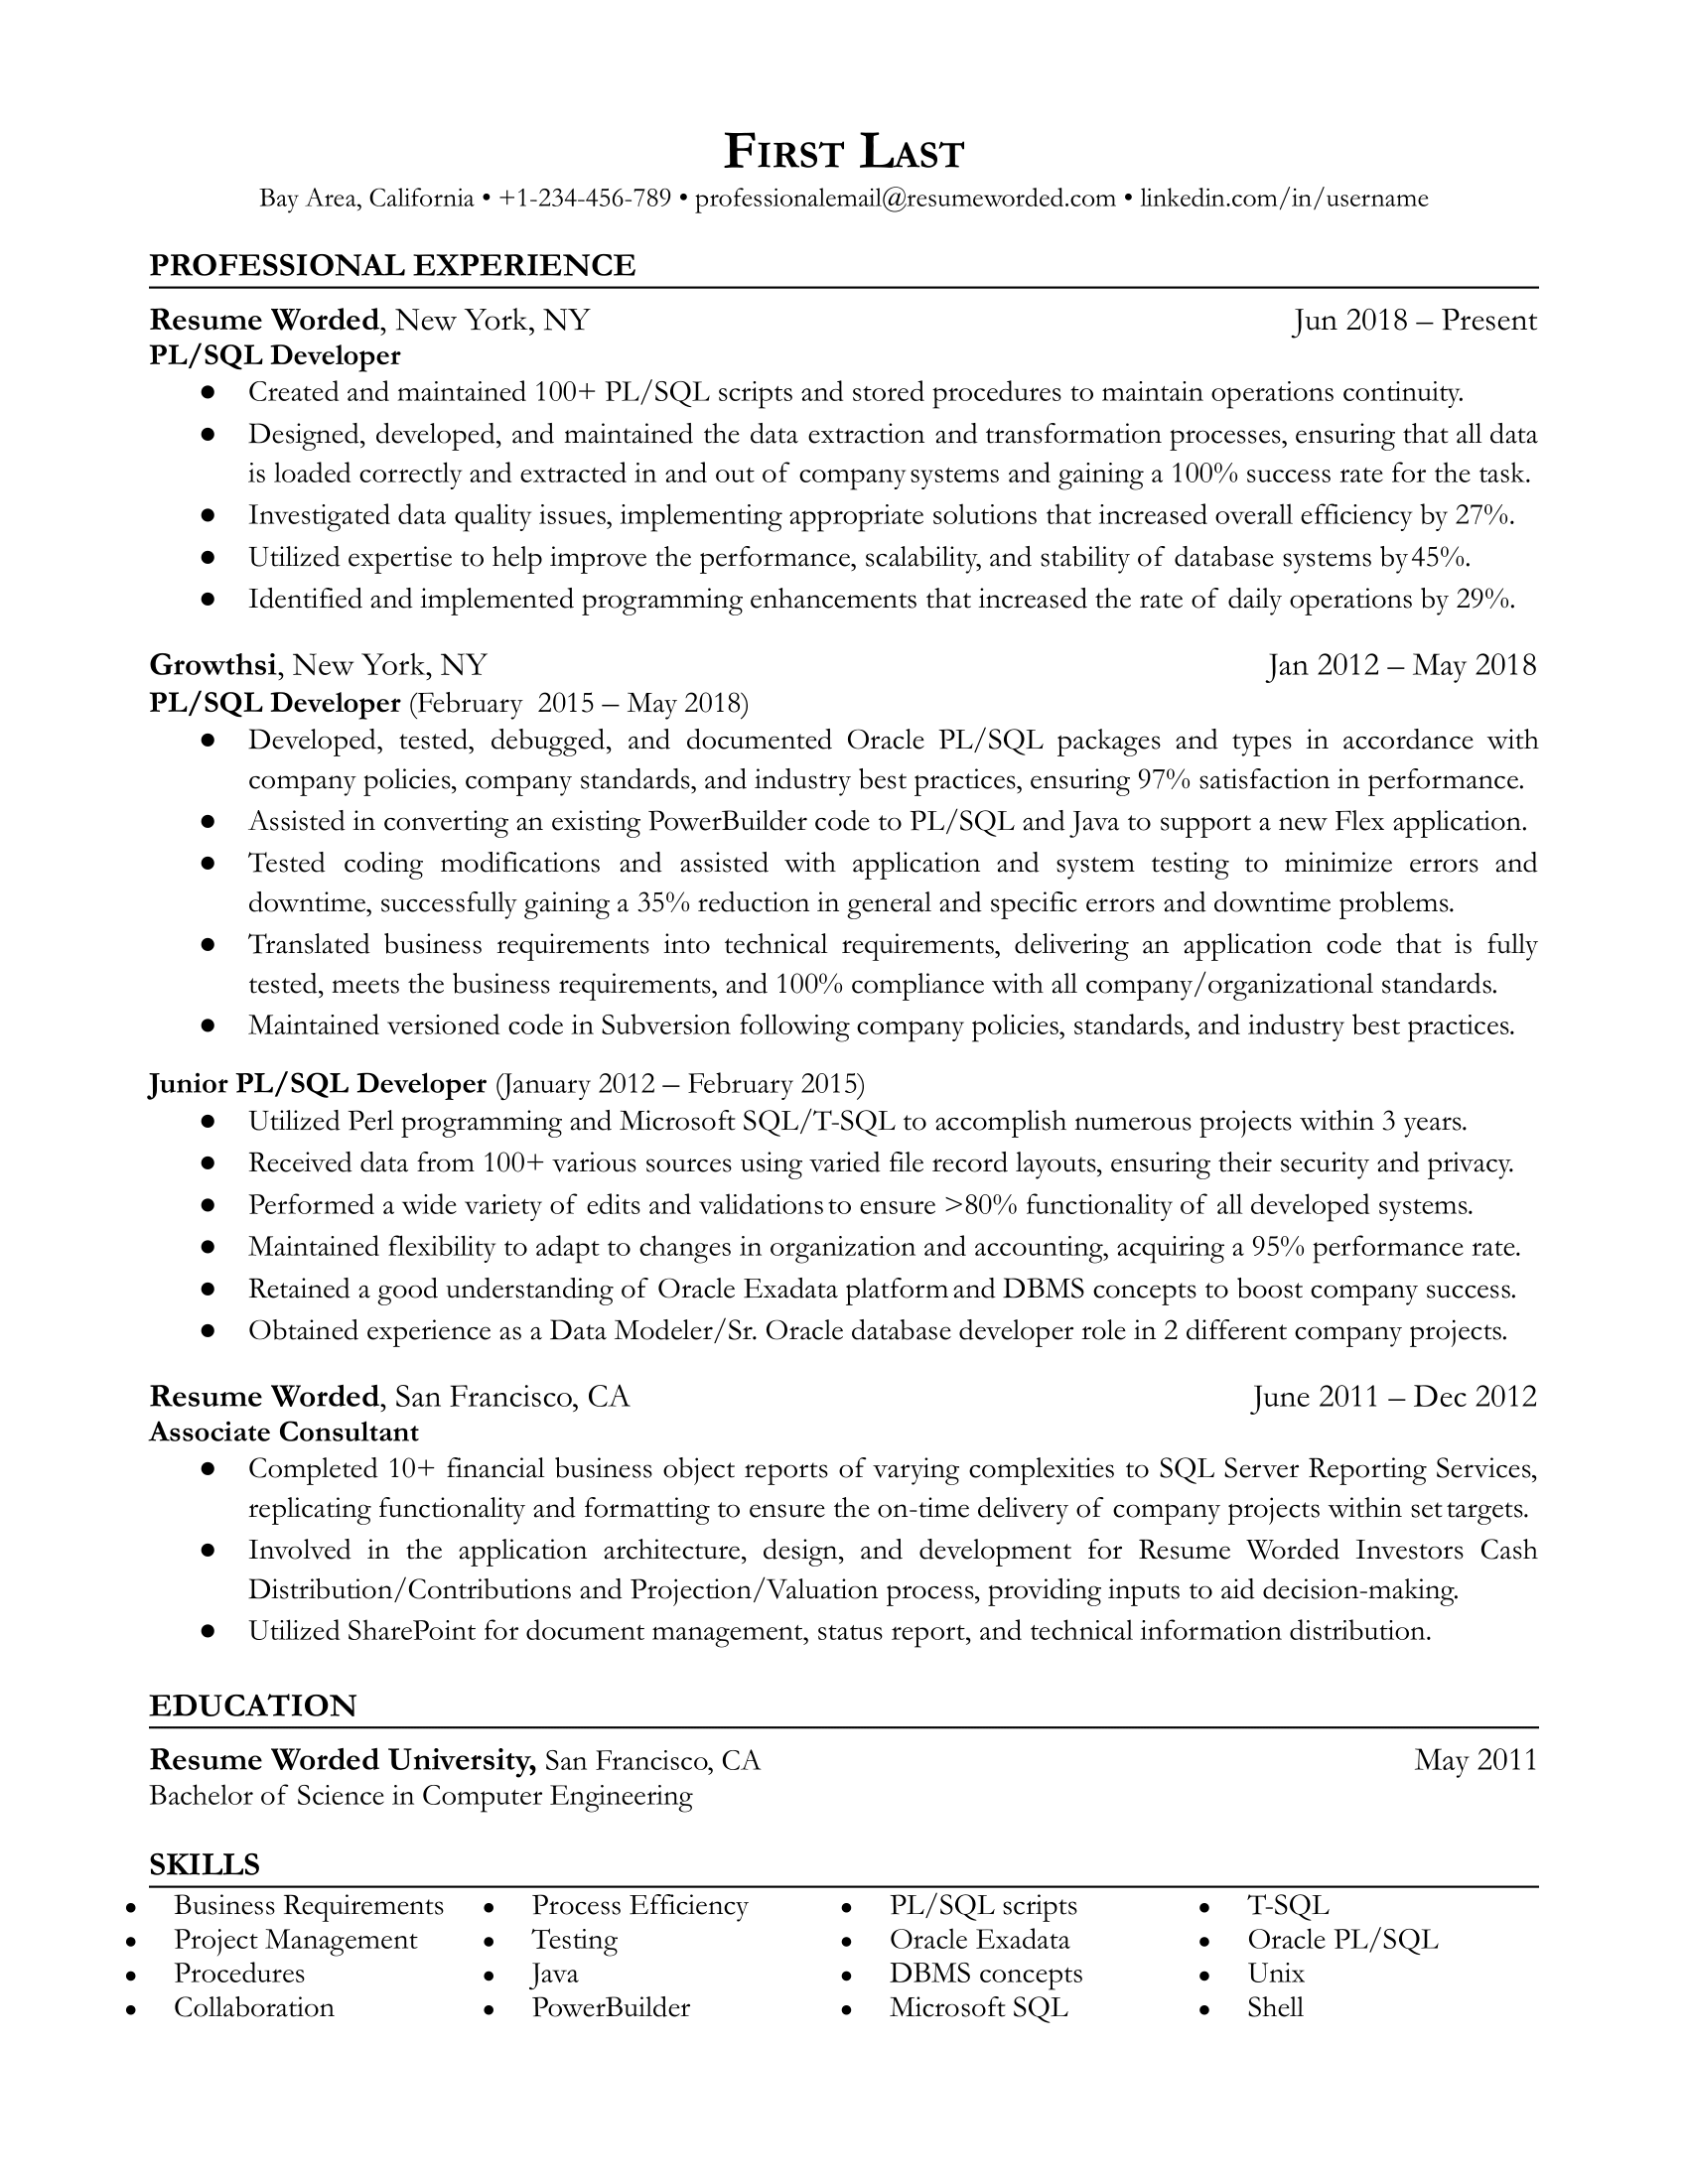 A CV for a PL/SQL Developer showcasing Oracle tool proficiency.